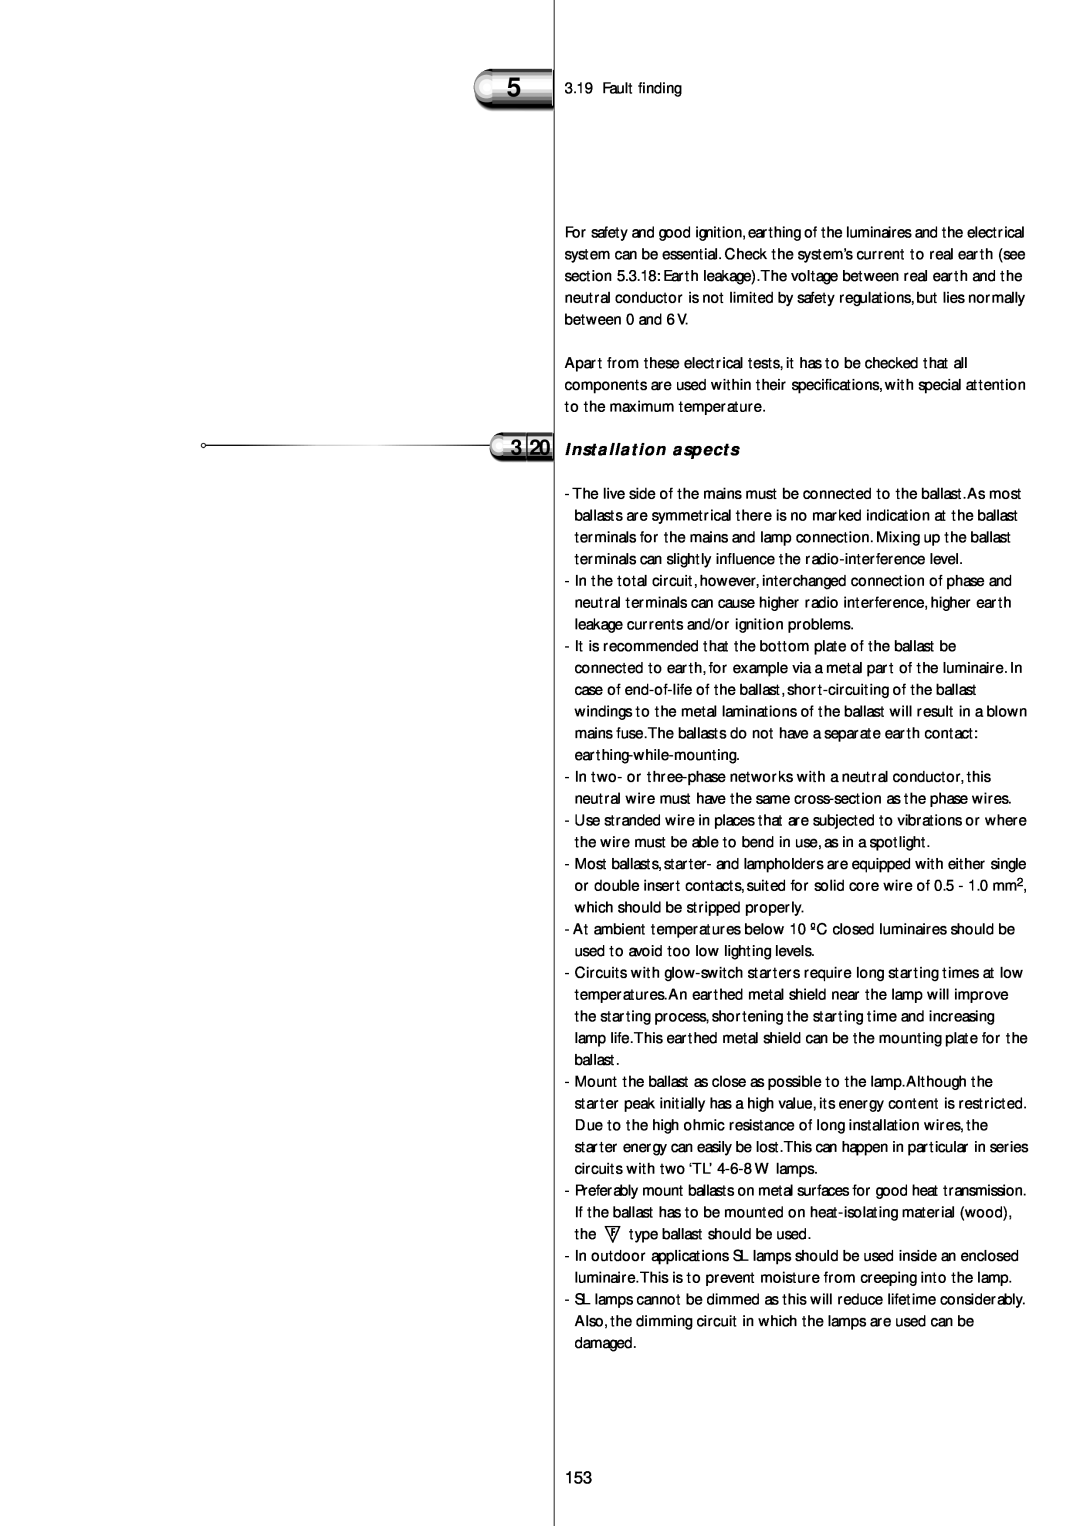 Philips Electromagnetic Lamp manual 3 20Installation aspects 